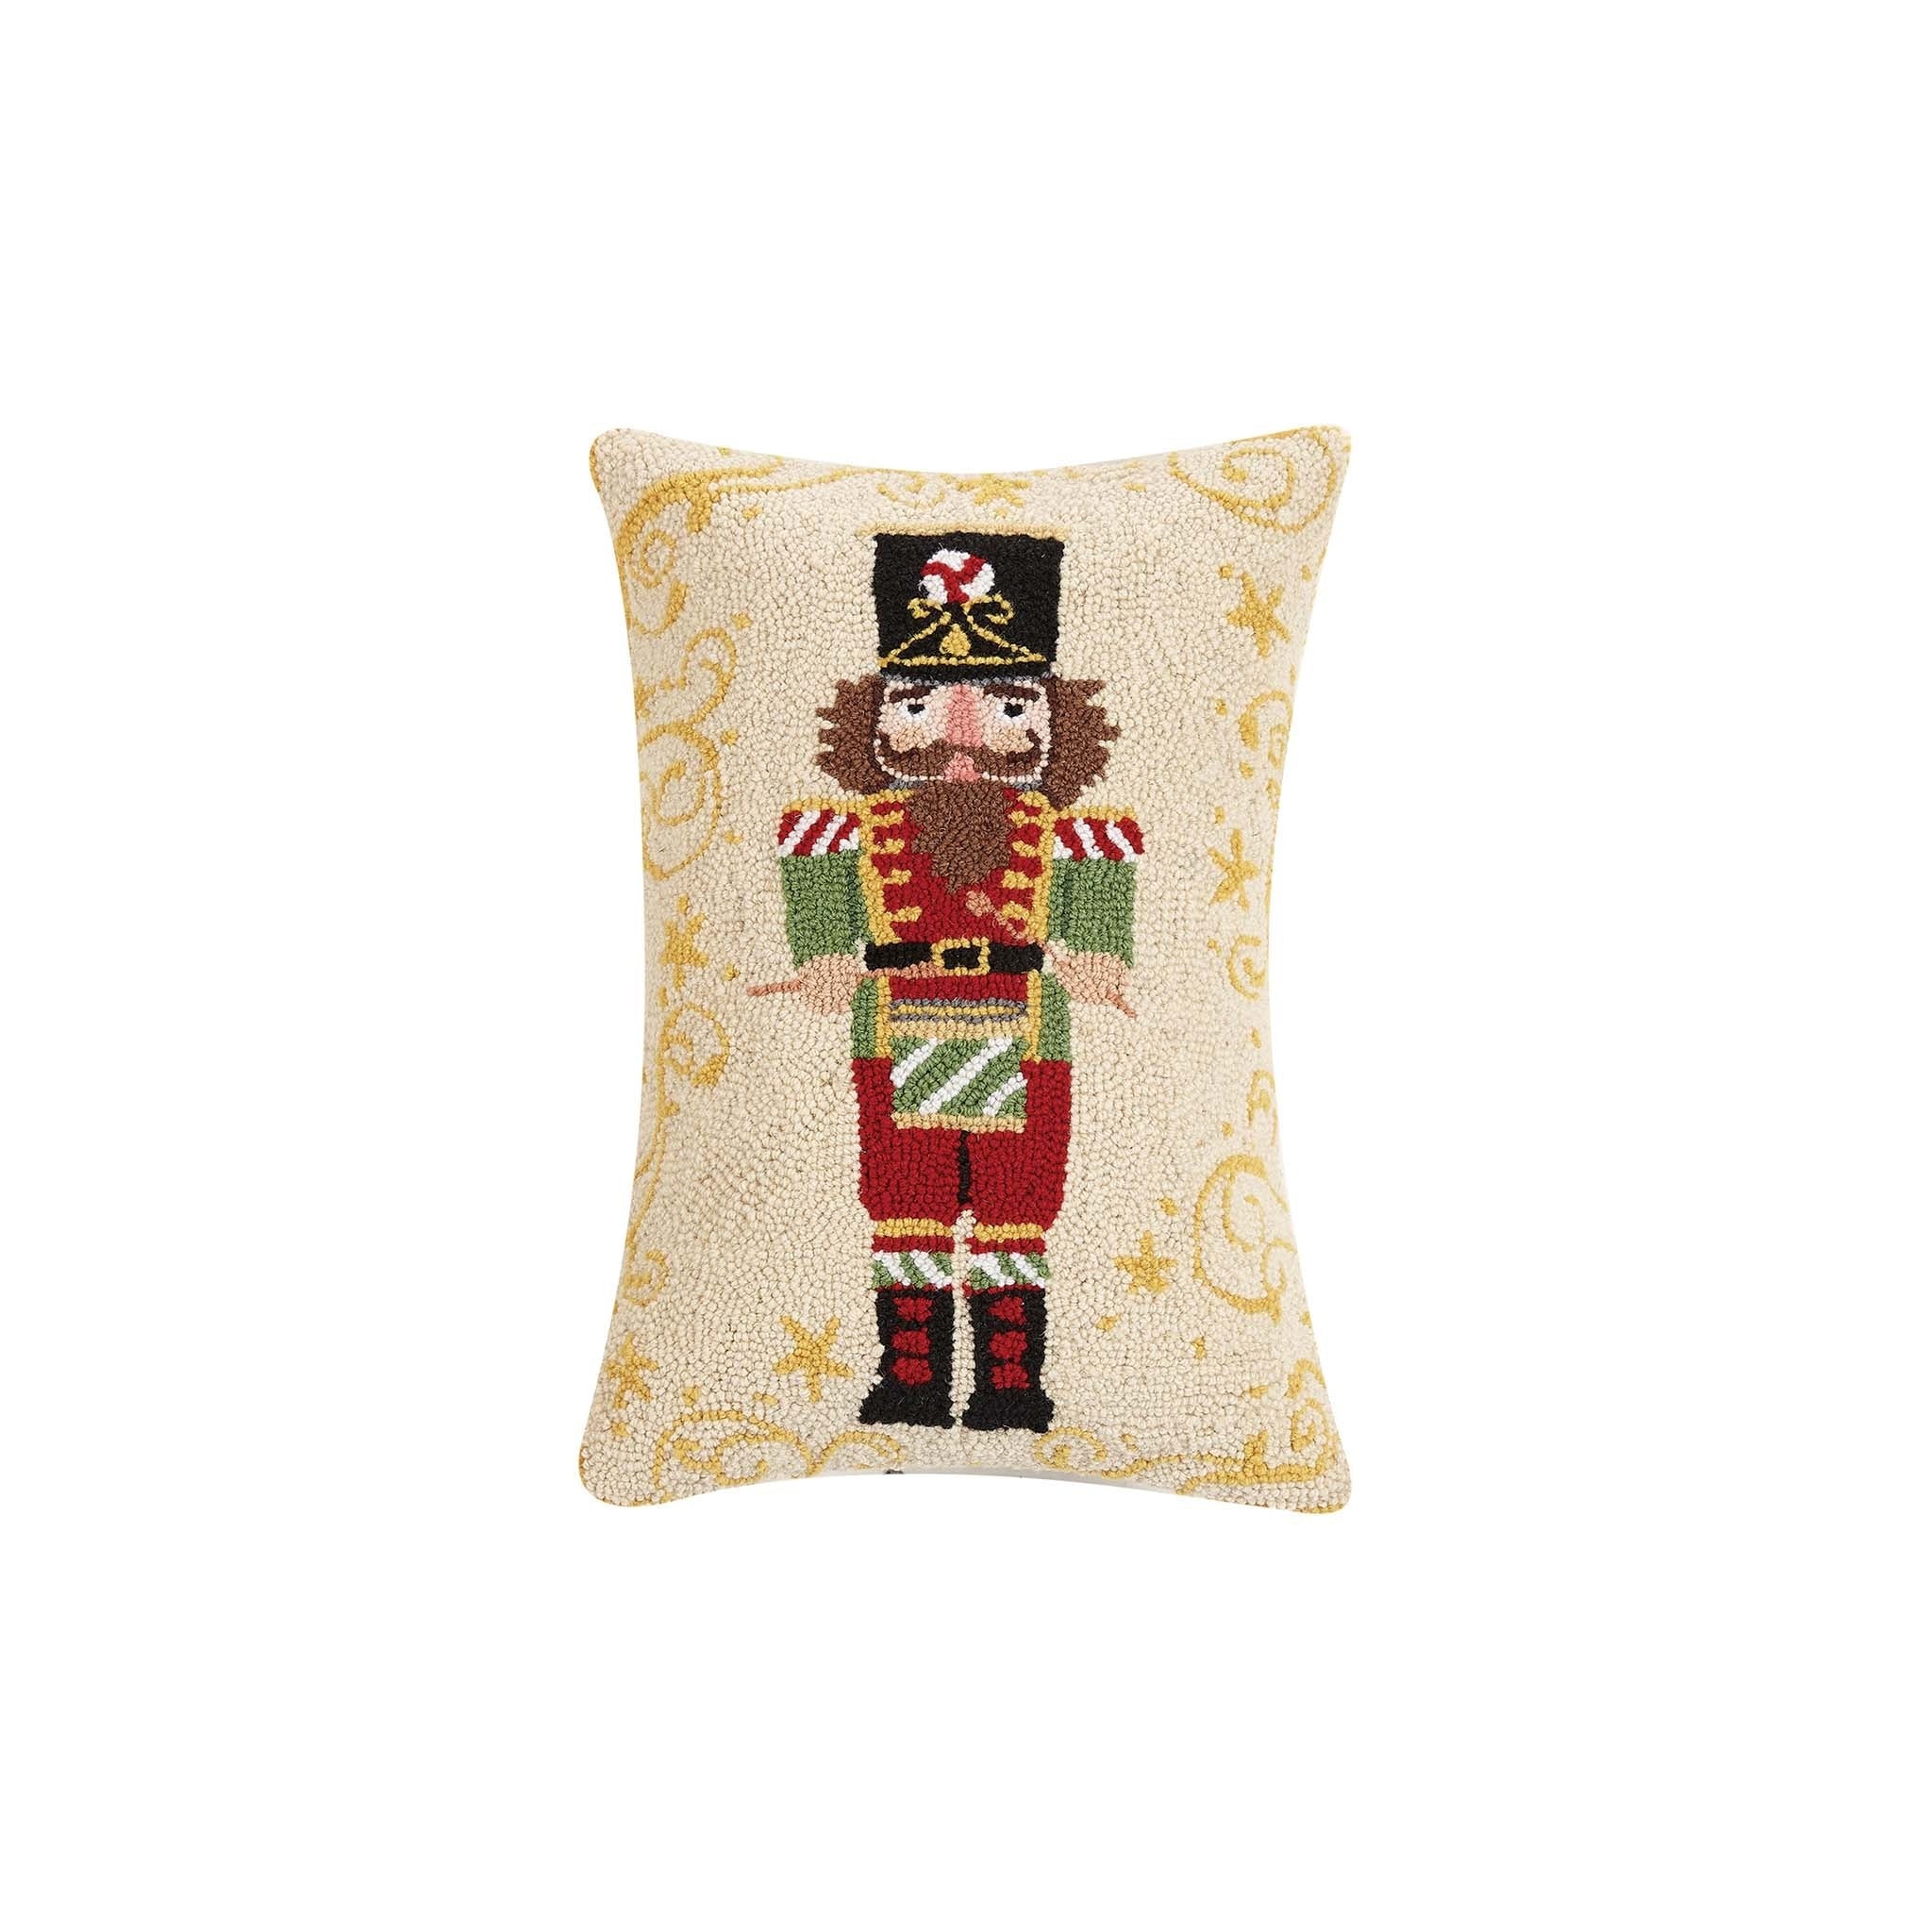 Magical Season Nutcracker and Drum Hooked Pillow